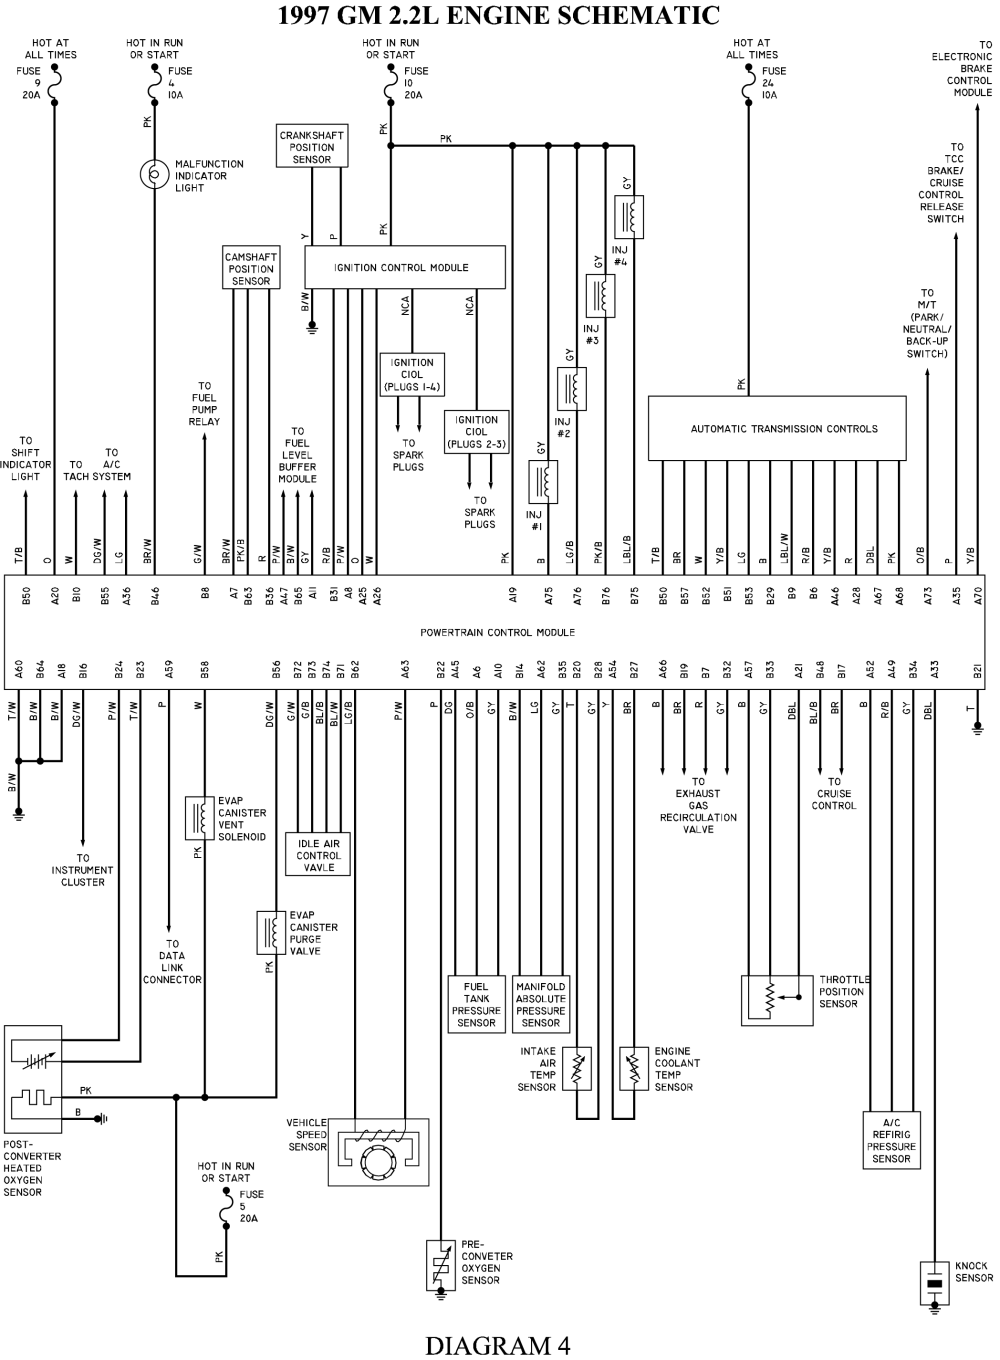 1997 Chevy S10 4 3 Wiring Diagram